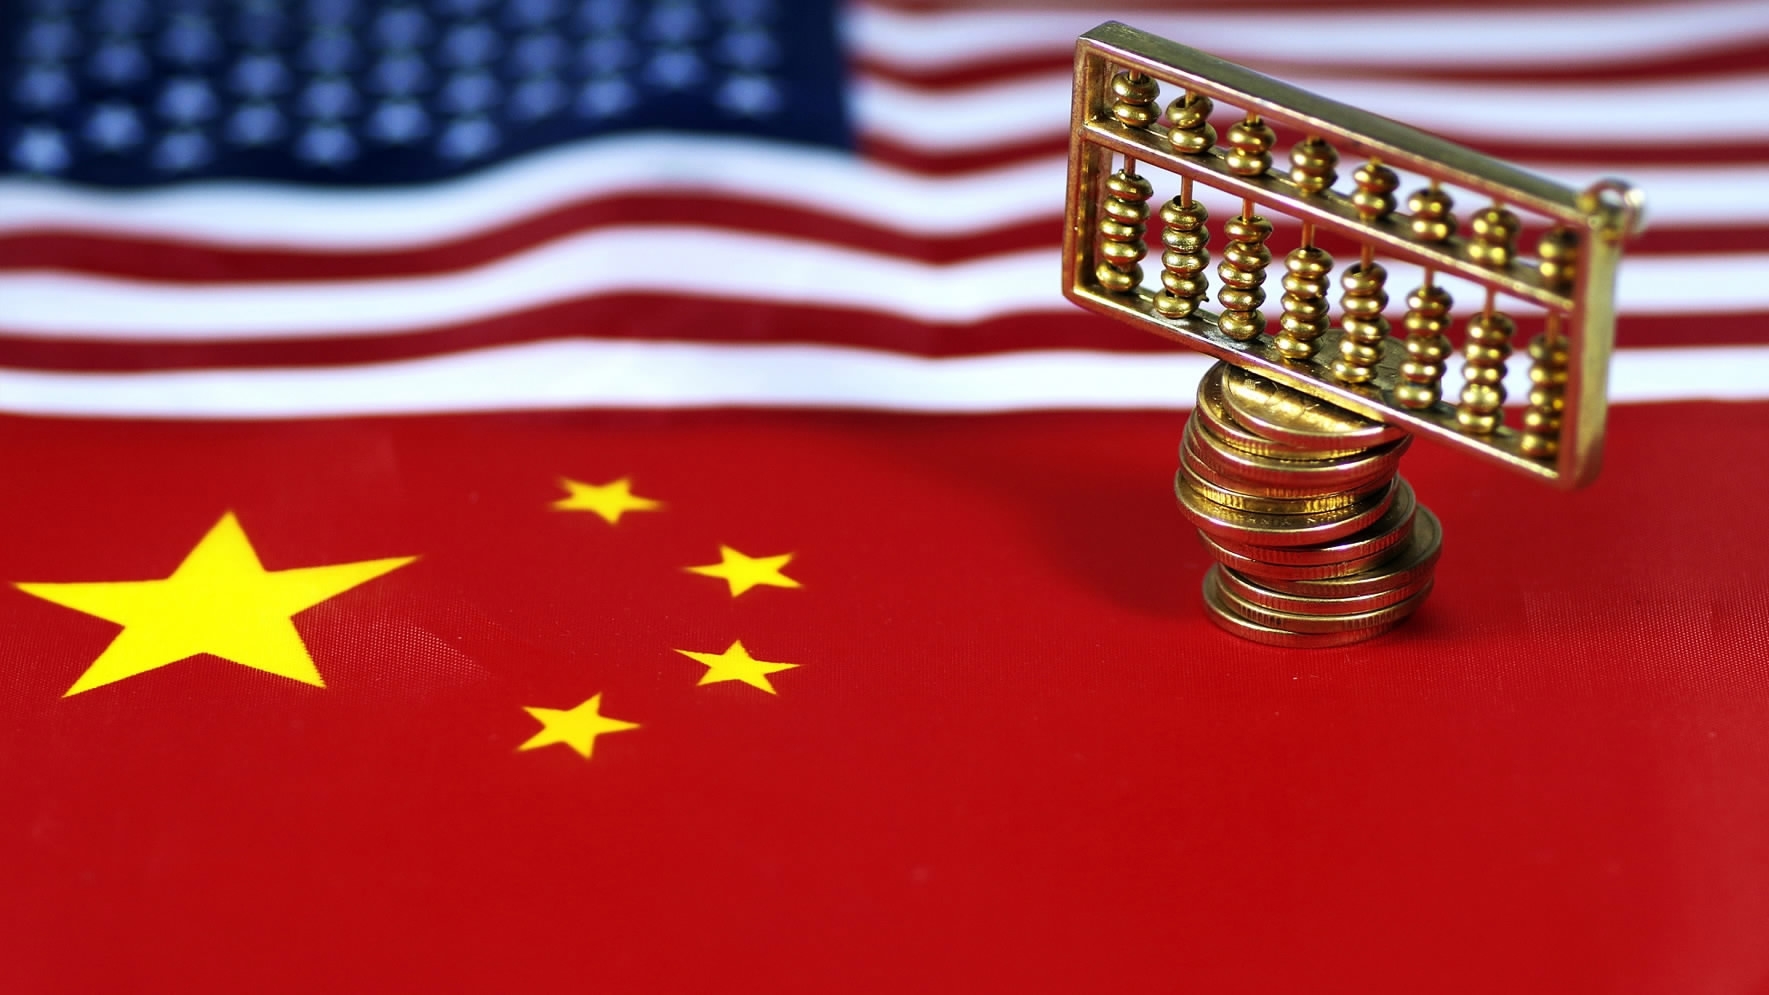 China says it is prepared to fight US tariffs “in a decisive manner”